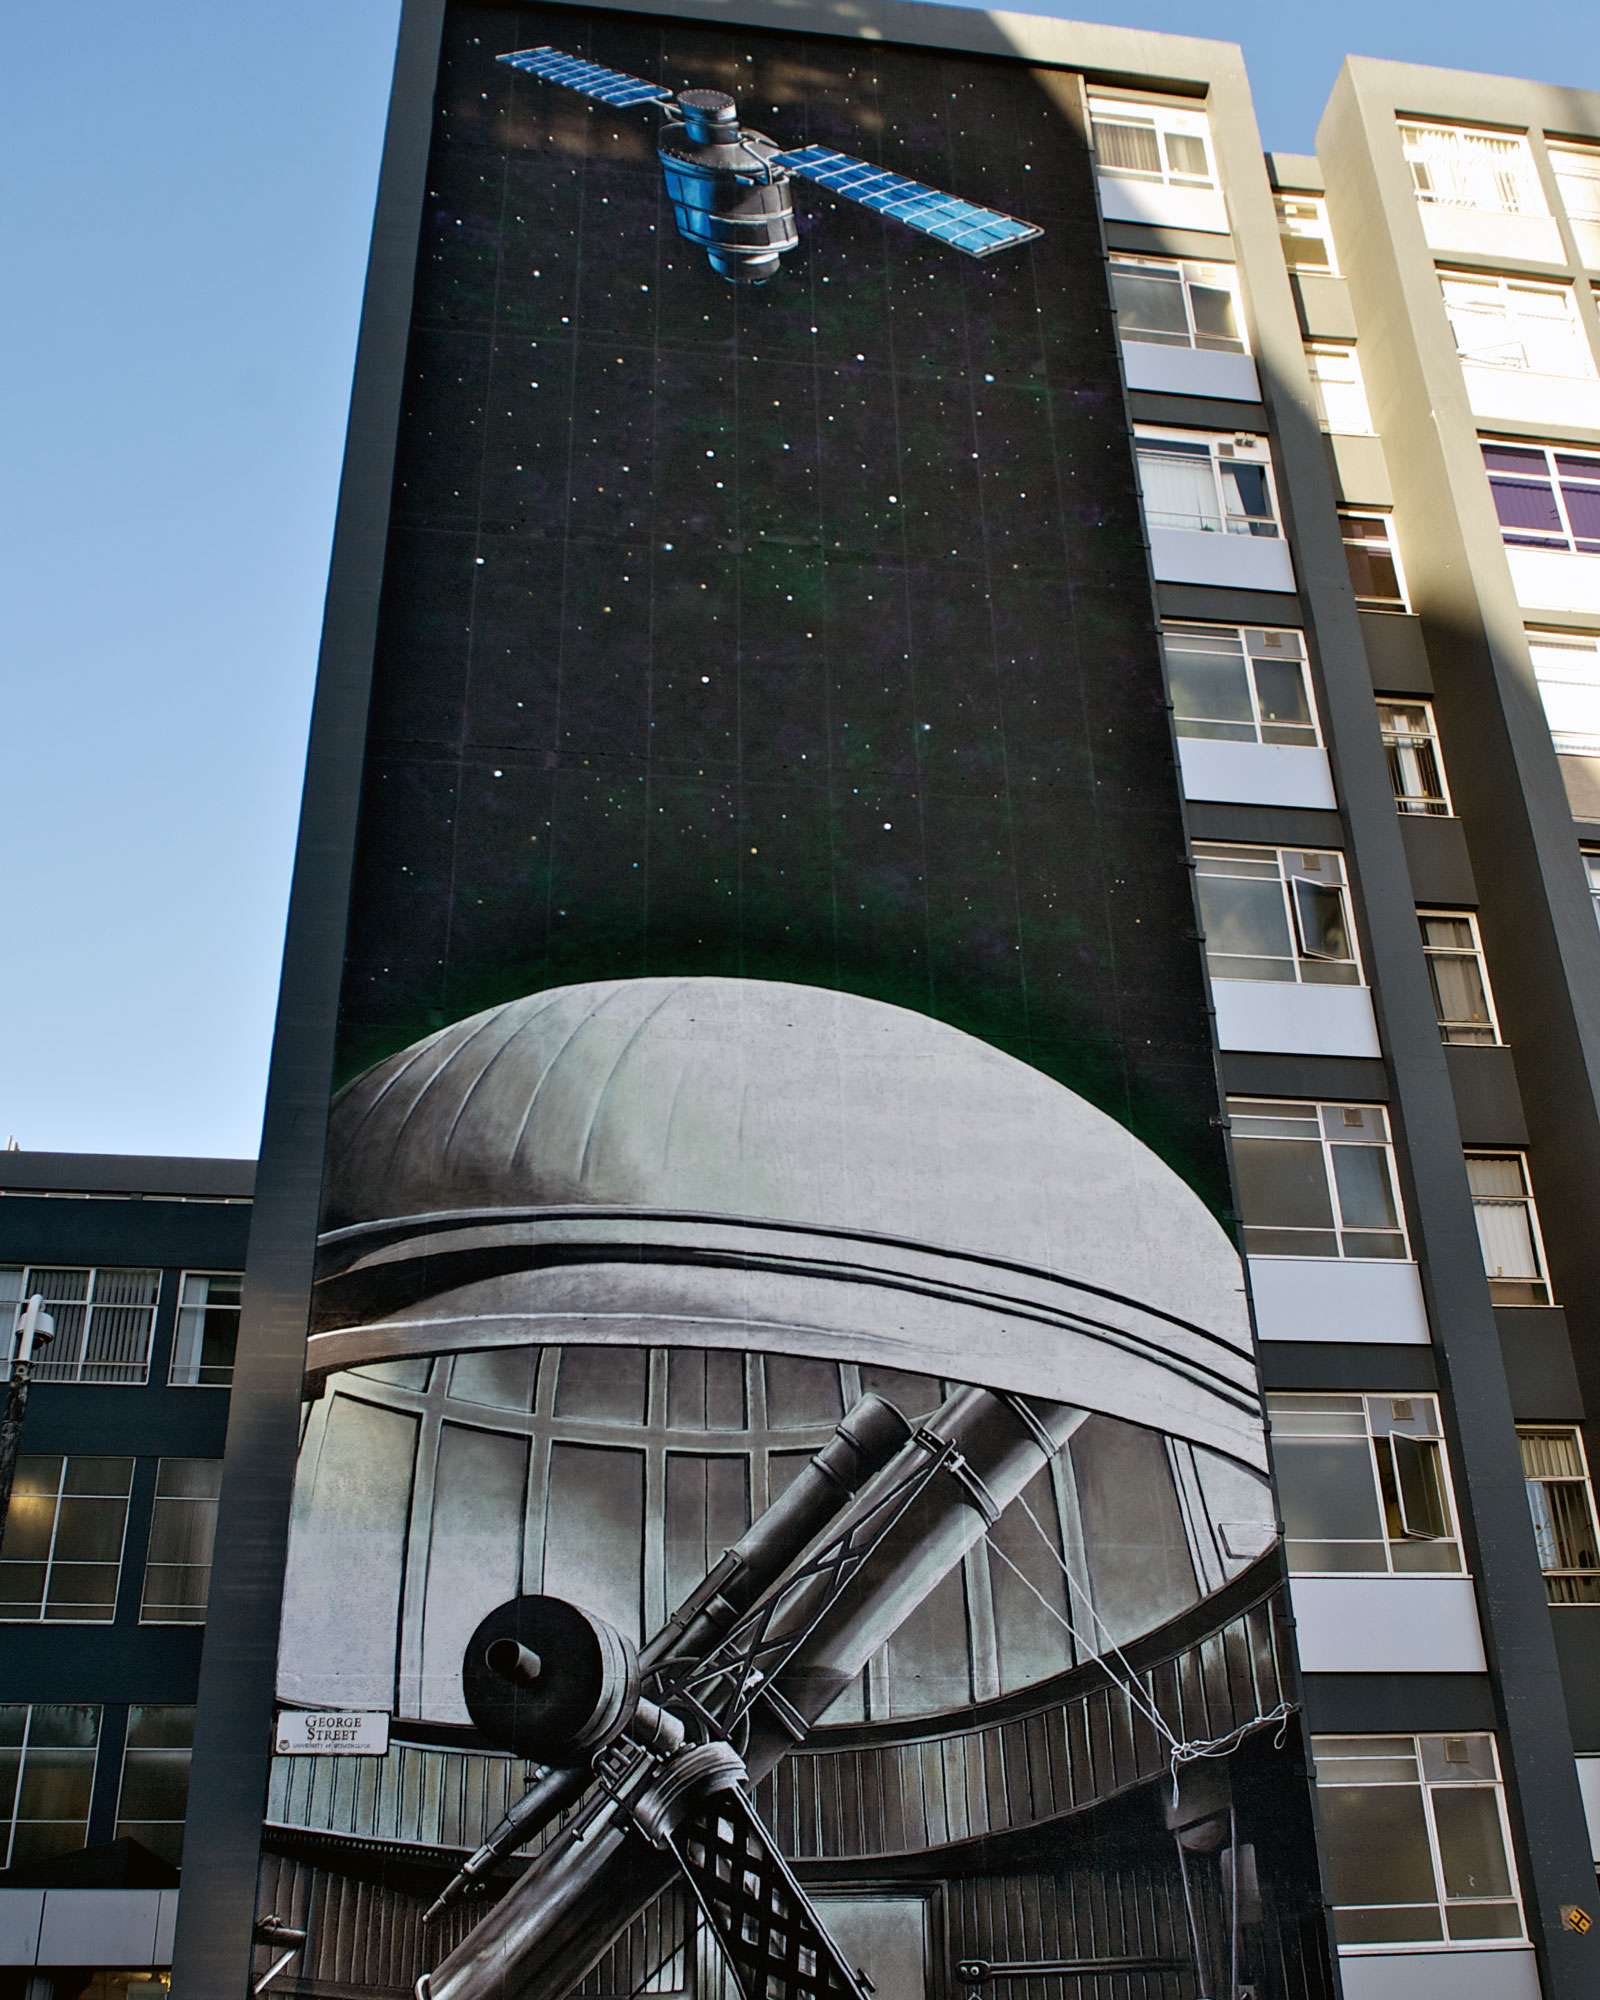 gable 1 - a satellite and telescope painted on the gable end of the graham hills building